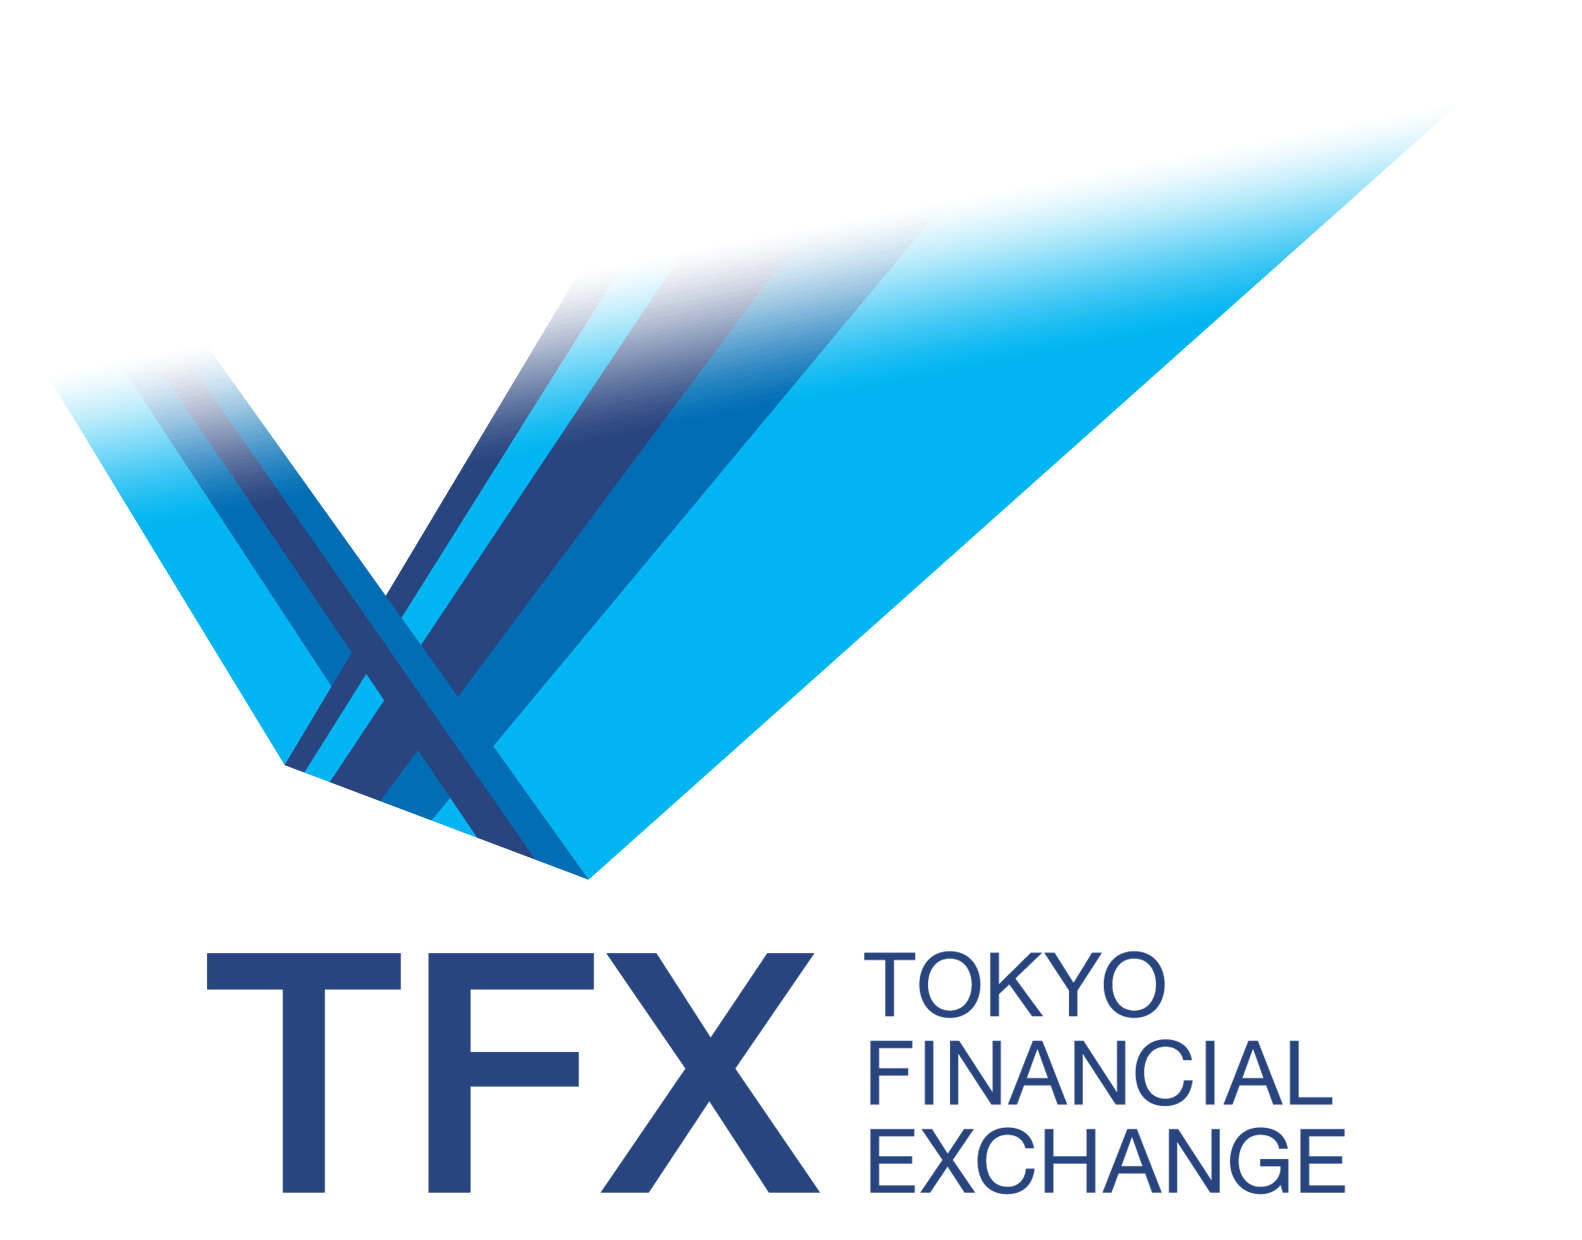 Tokyo Financial Exchange’s May FX Volumes Decline by -10% MoM